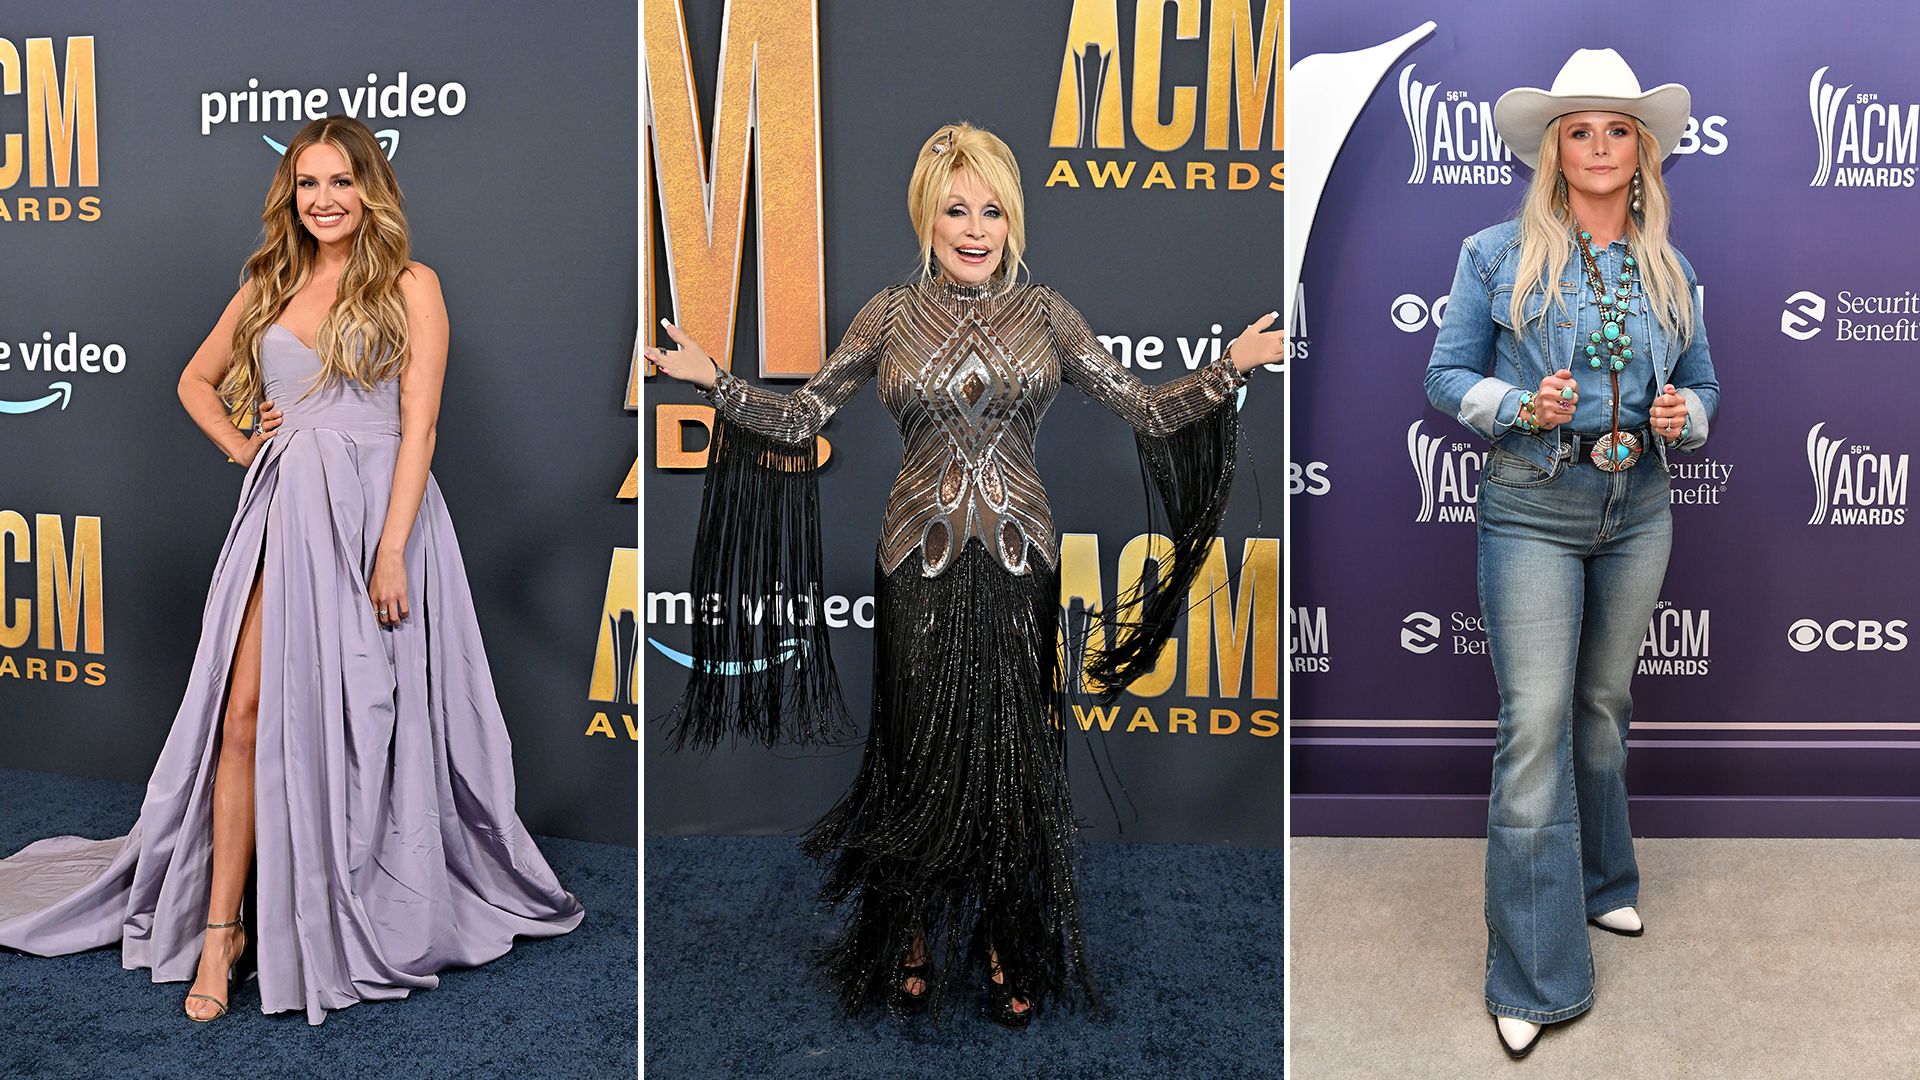 All the performers at the 2023 ACM Awards Carly Pearce, Dolly Parton